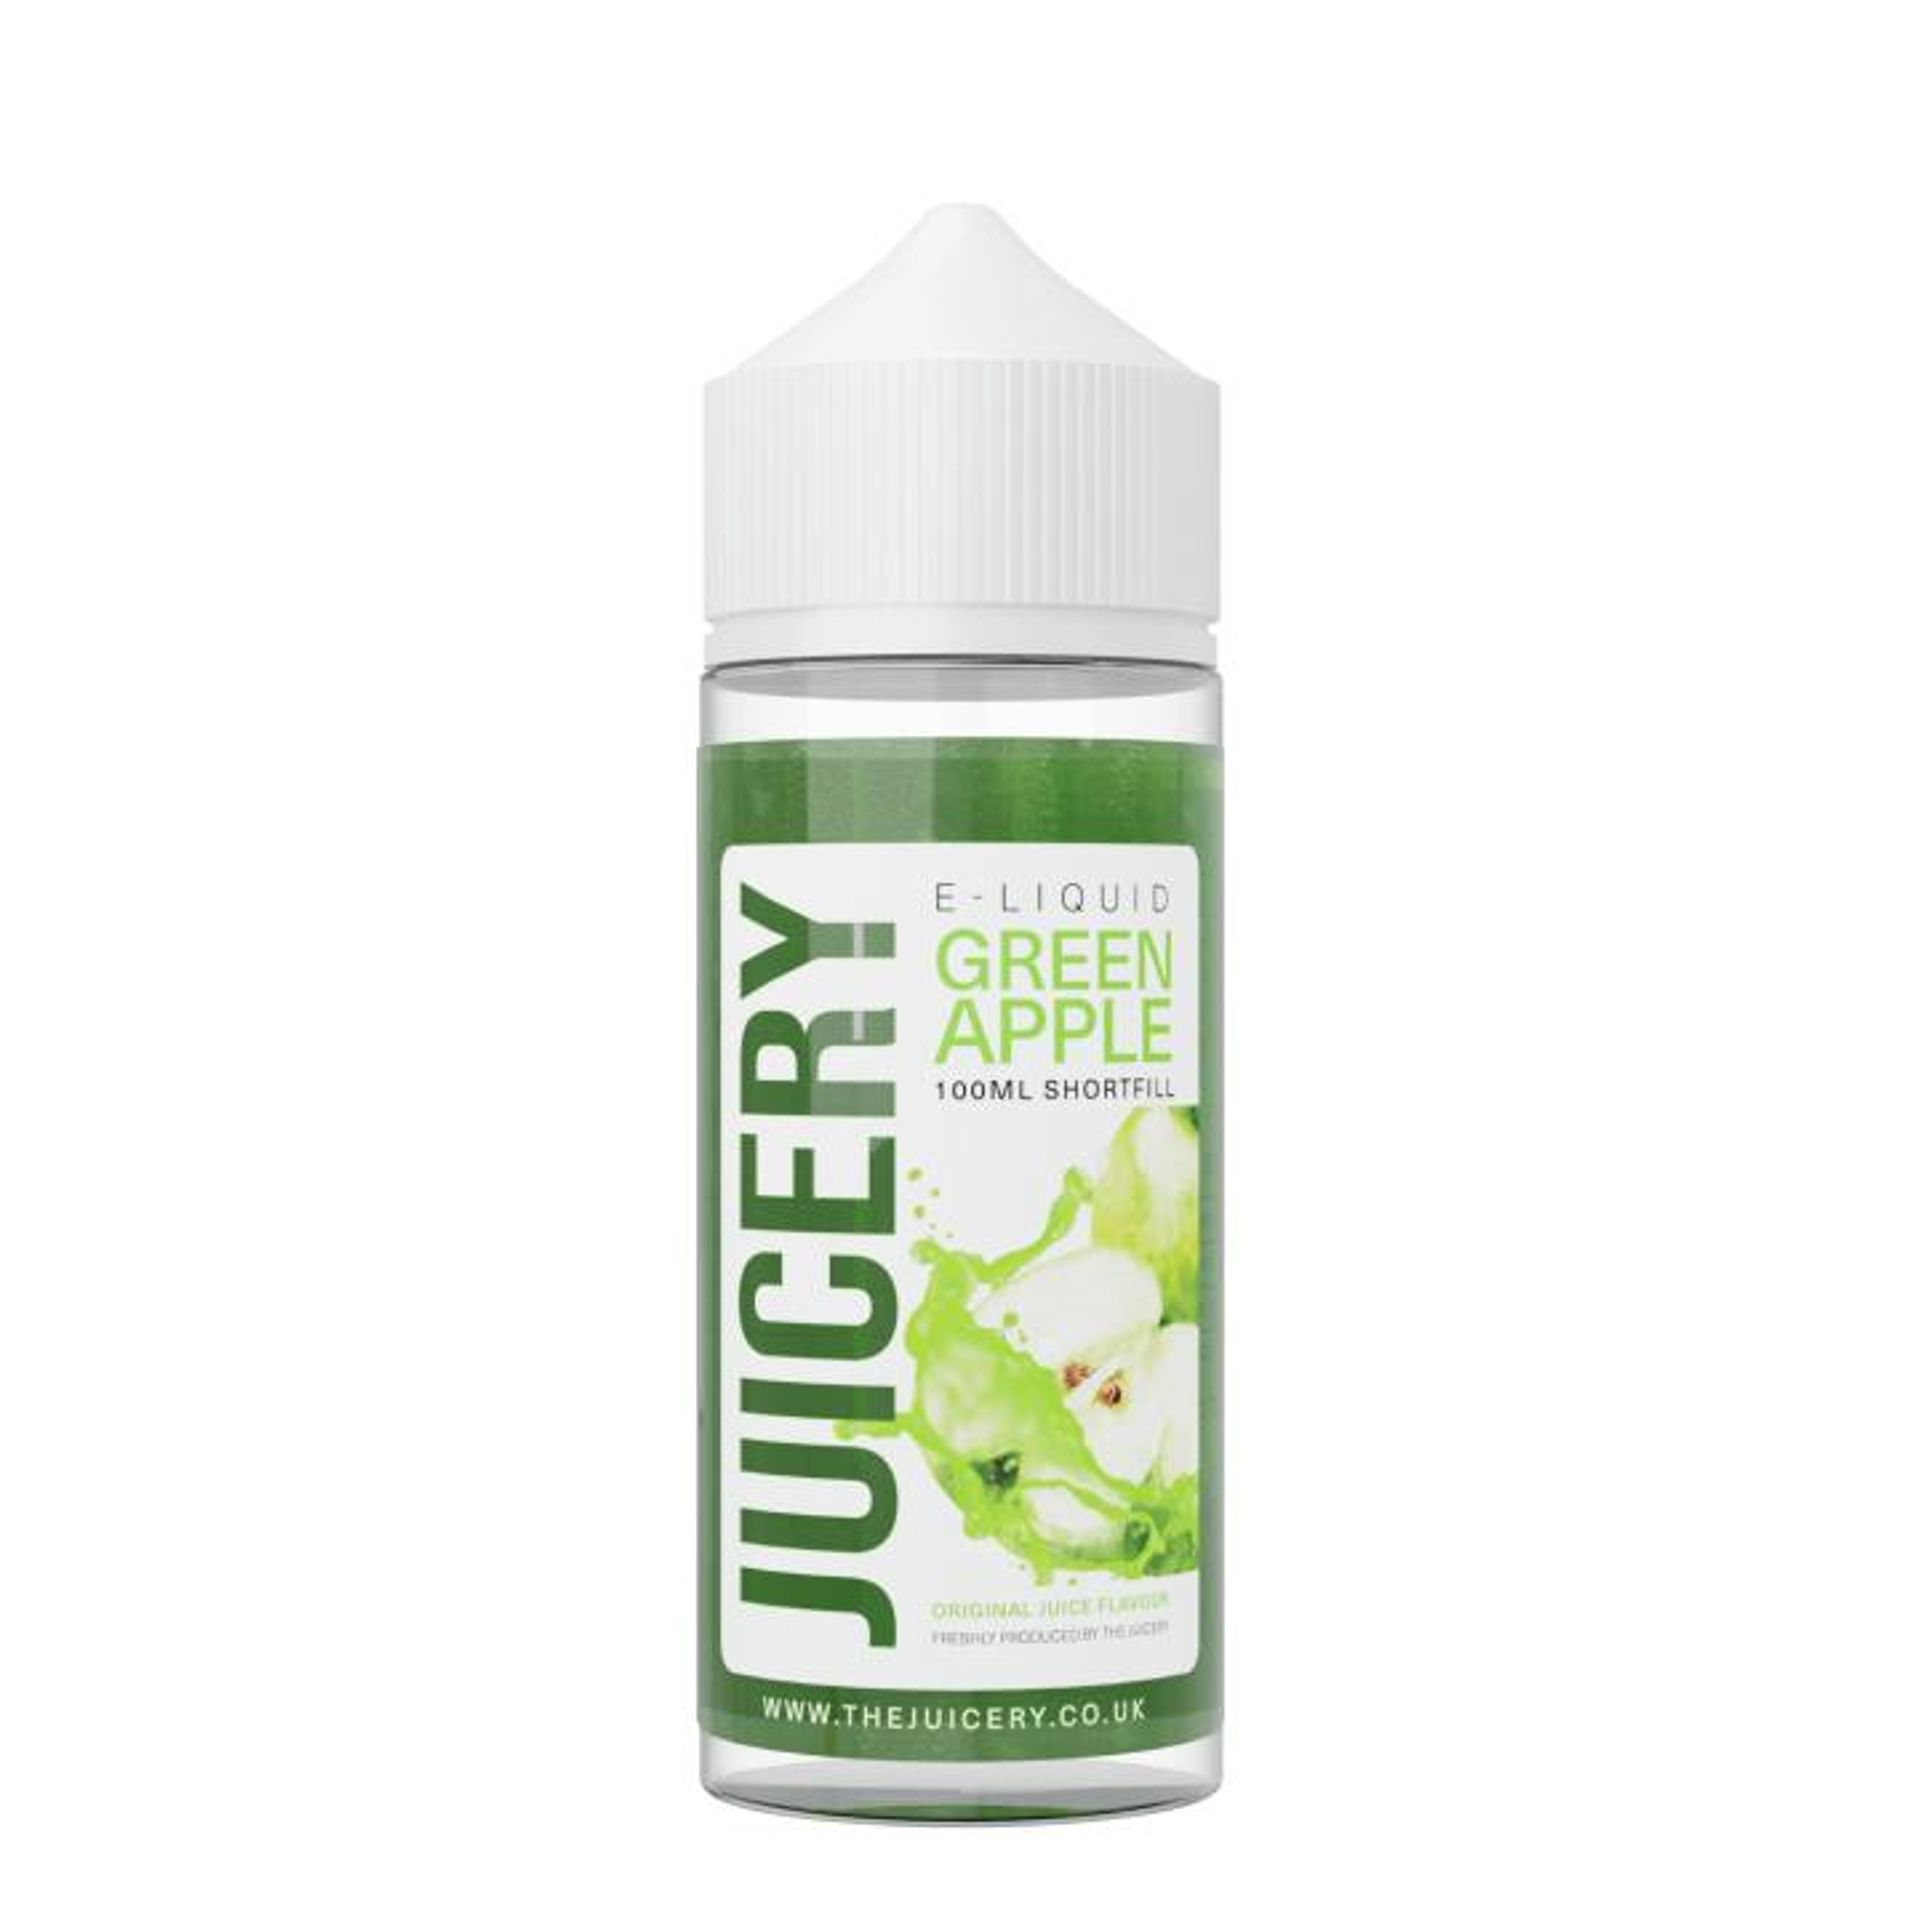 Image of Green Apple by The Juicery